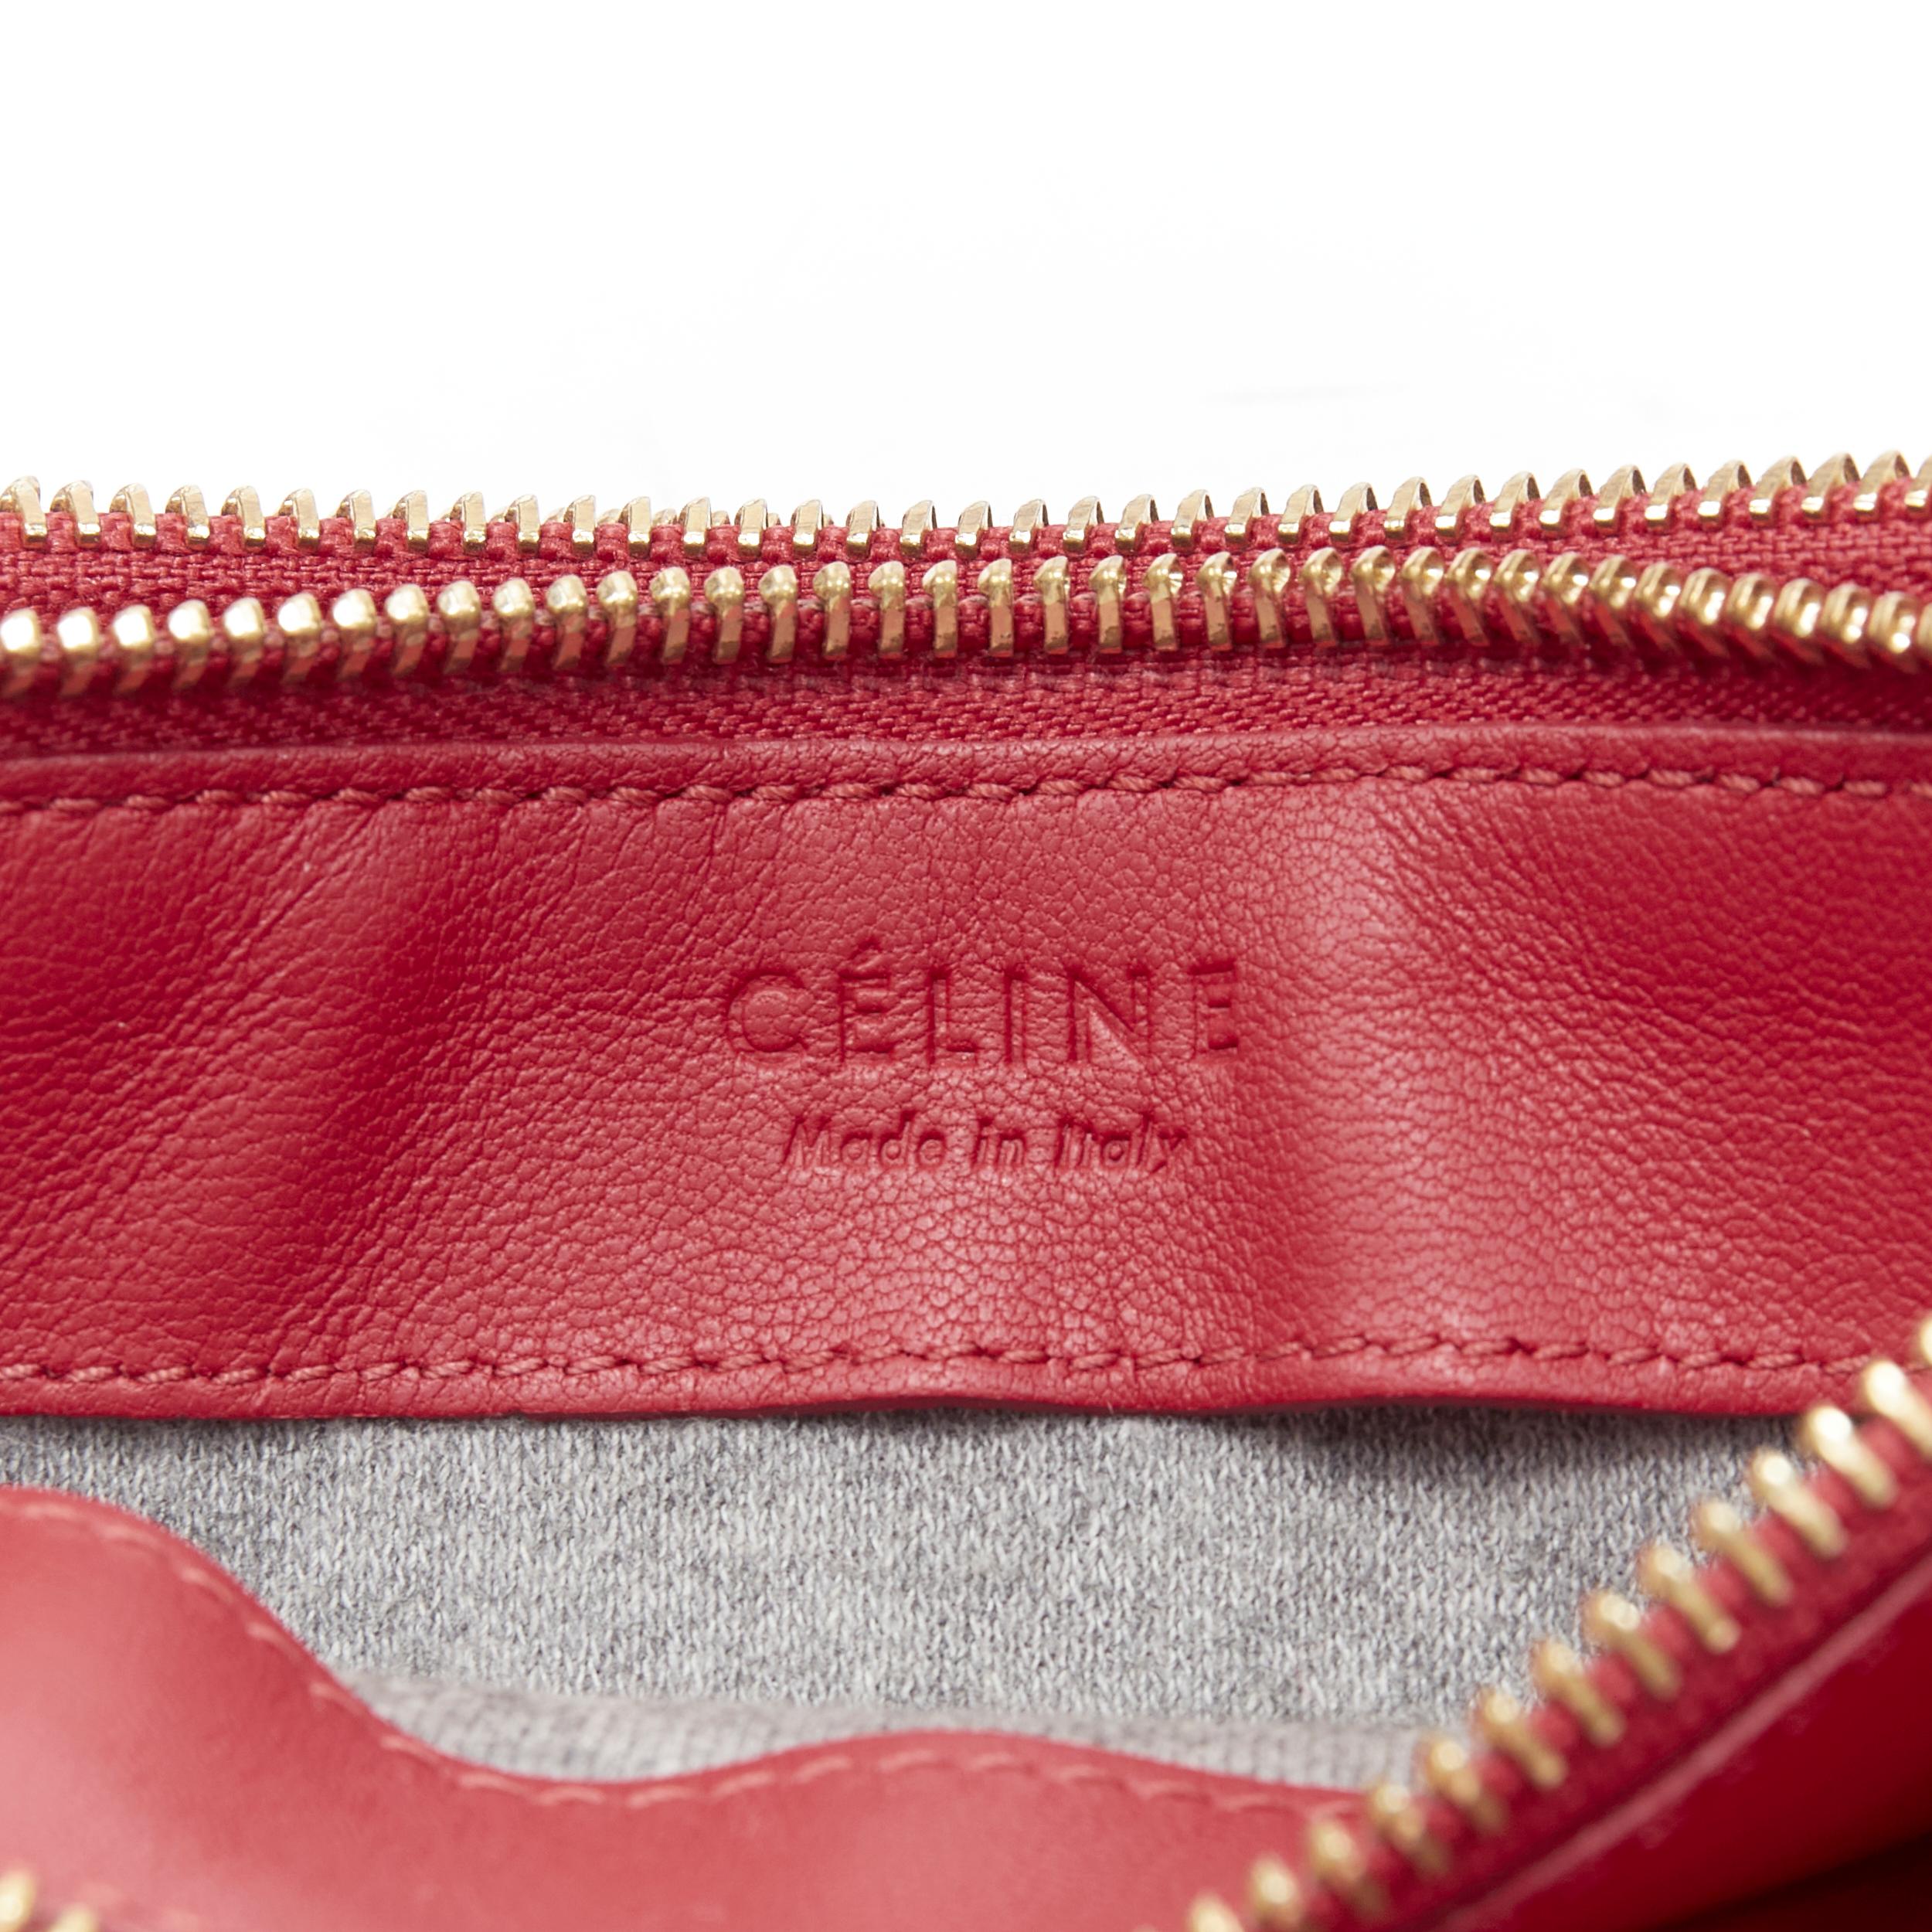 OLD CELINE Phoebe Philo Trio red gold zip triple snap pouch crossbody bag For Sale 4